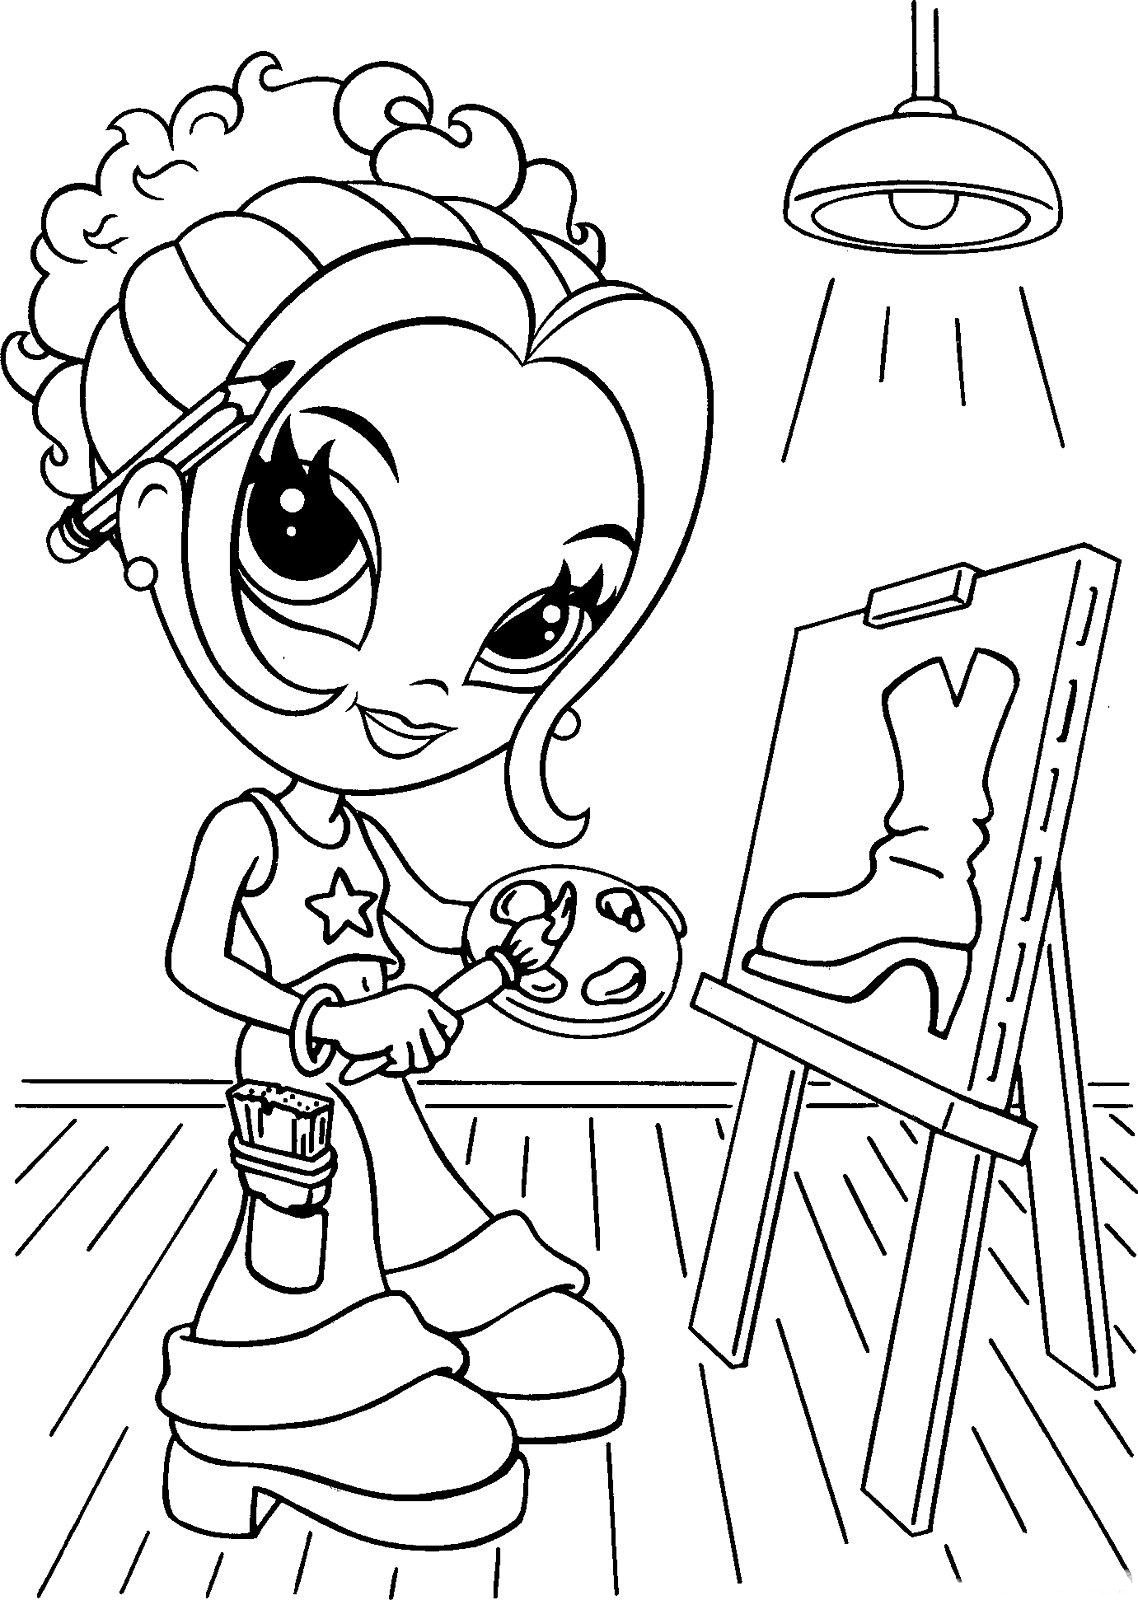 Escalator Coloring Pages at GetColorings.com | Free printable colorings ...